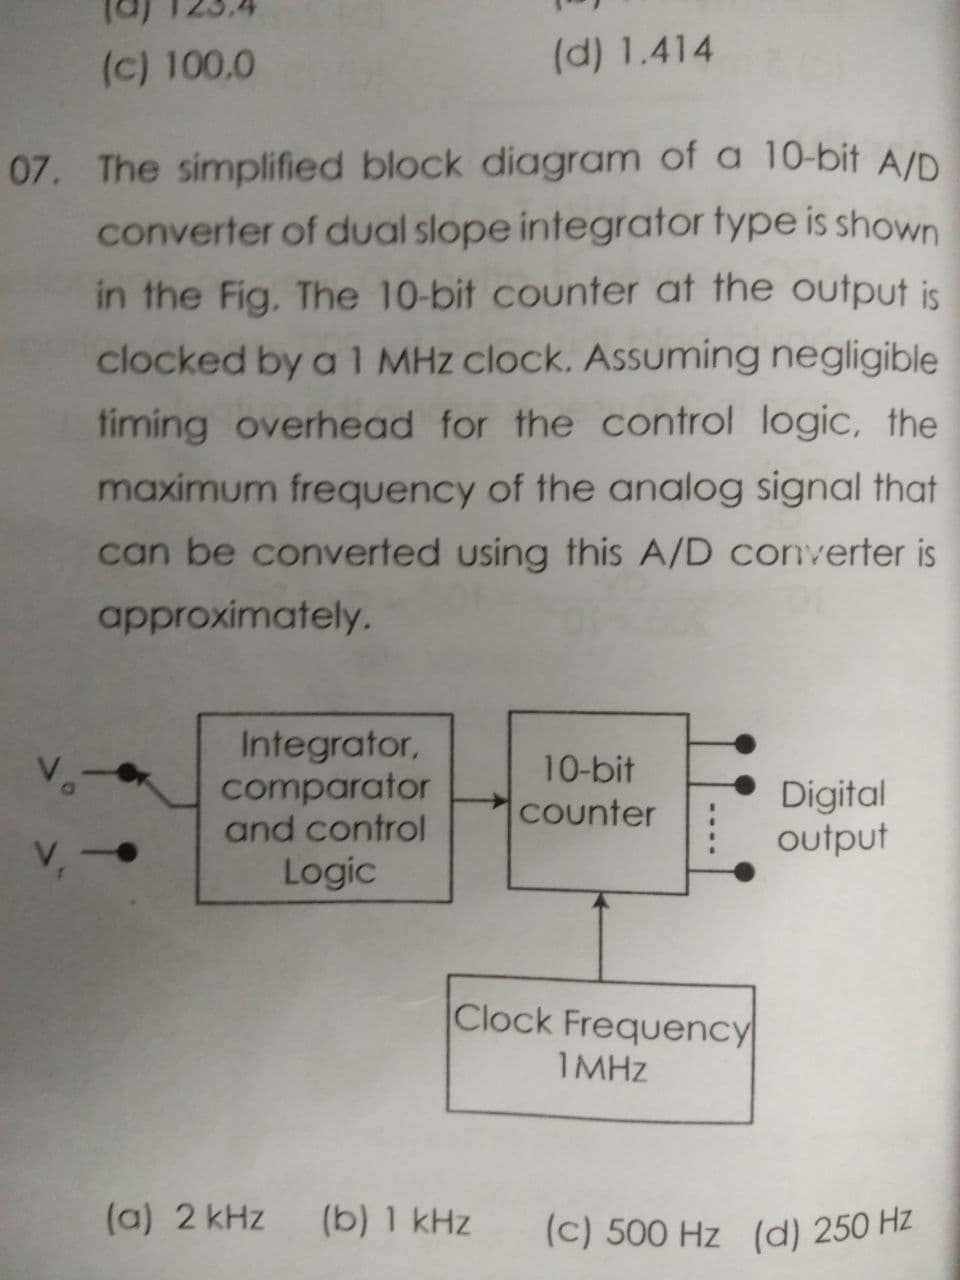 (c) 100.0
(d) 1.414
07. The simplified block diagram of a 10-bit A/D
converter of dual slope integrator type is shown
in the Fig. The 10-bit counter at the output is
clocked by a1 MHz clock. Assuming negligible
fiming overhead for the control logic, the
maximum frequency of the analog signal that
can be converted using this A/D converter is
approximately.
Integrator,
comparator
and control
10-bit
Digital
output
Counter
Logic
Clock Frequency
1MHZ
(a) 2 kHz
(b) 1 kHz
(c) 500 Hz (d) 250 Hz
